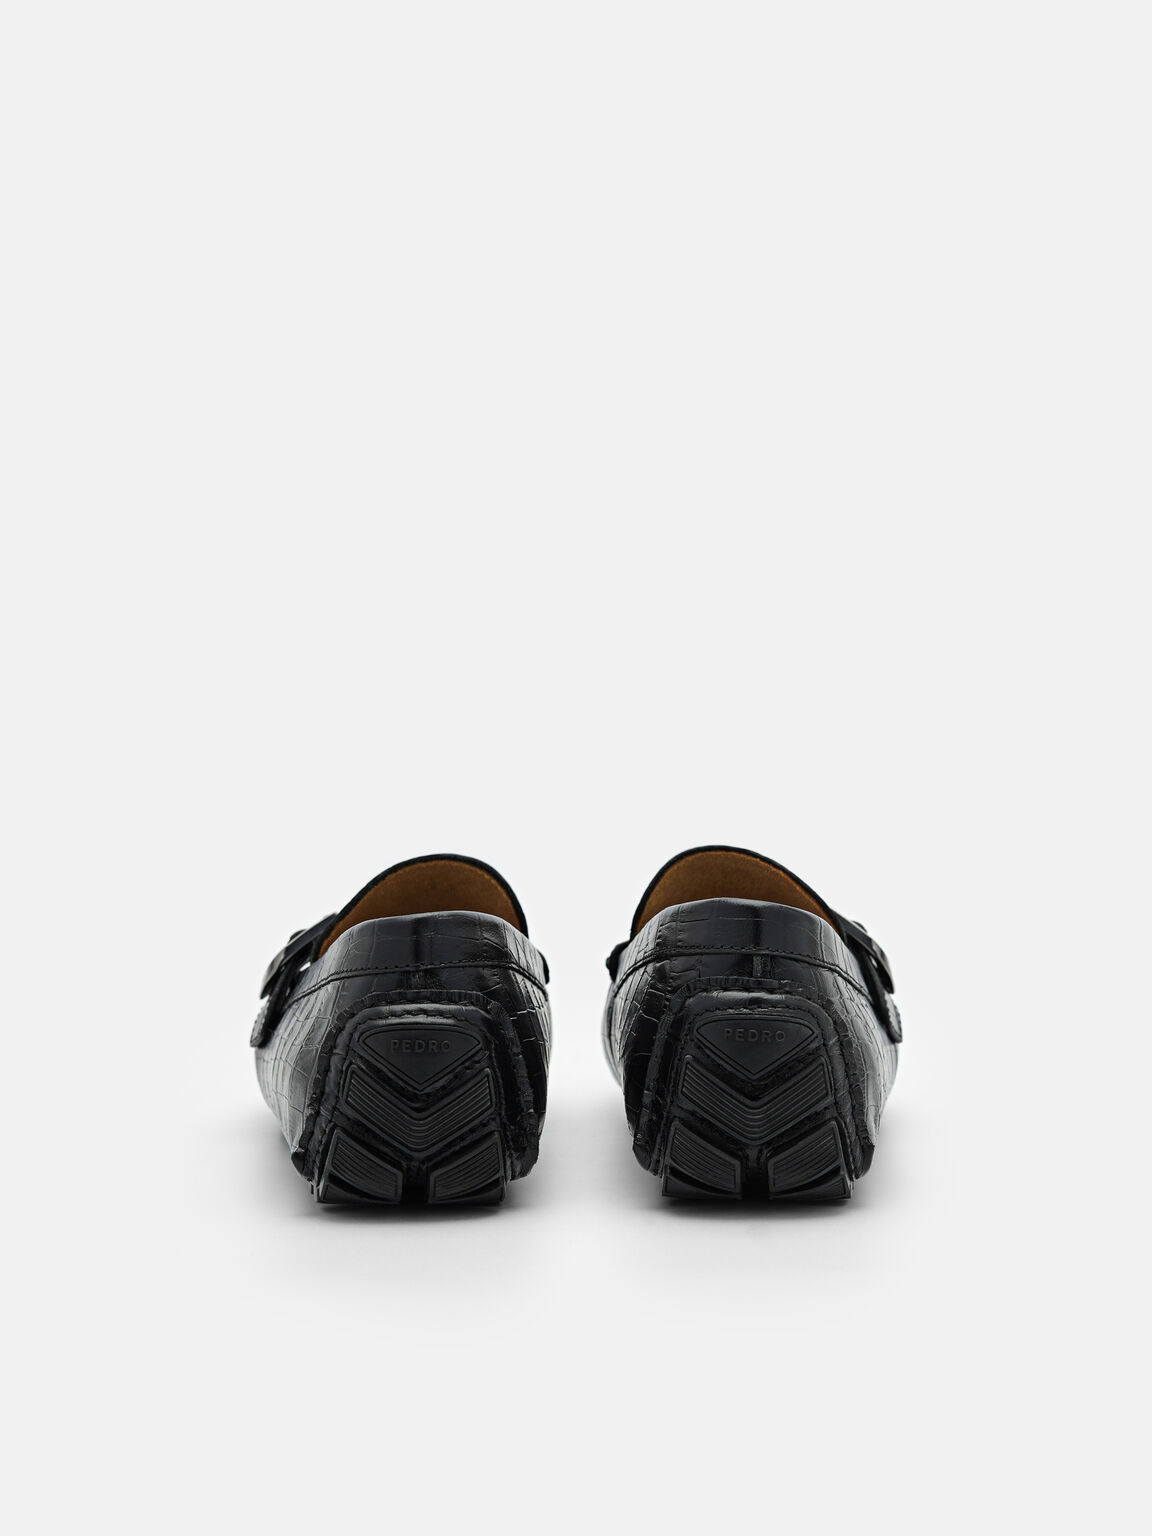 Helix Leather Driving Shoes, Black, hi-res